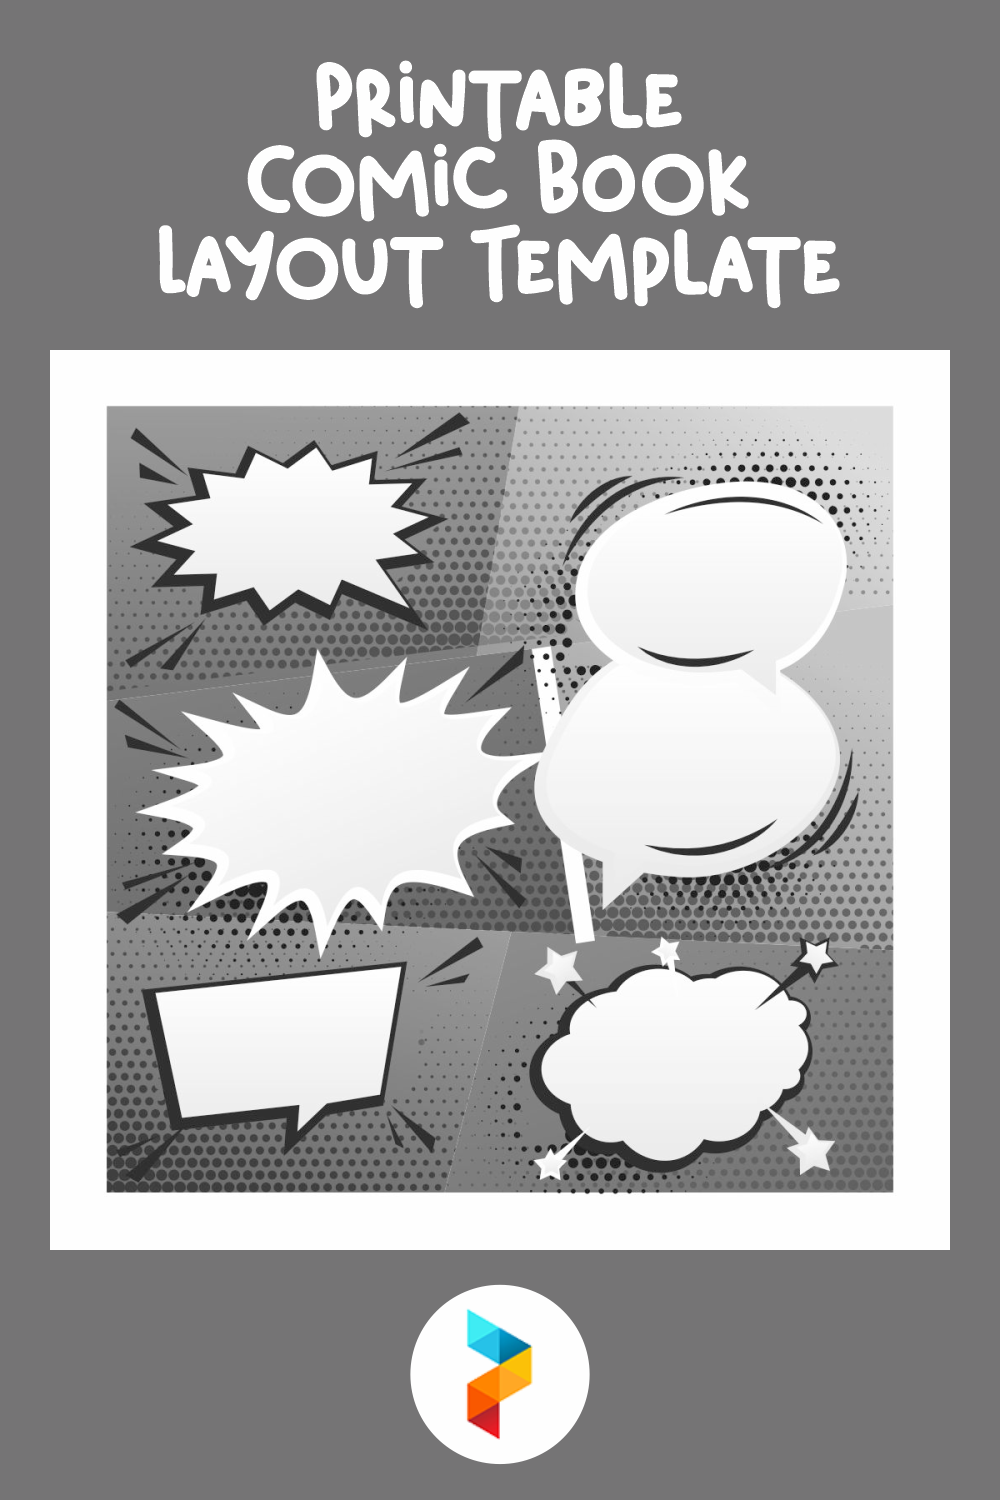 Printable Comic Book Layout Template